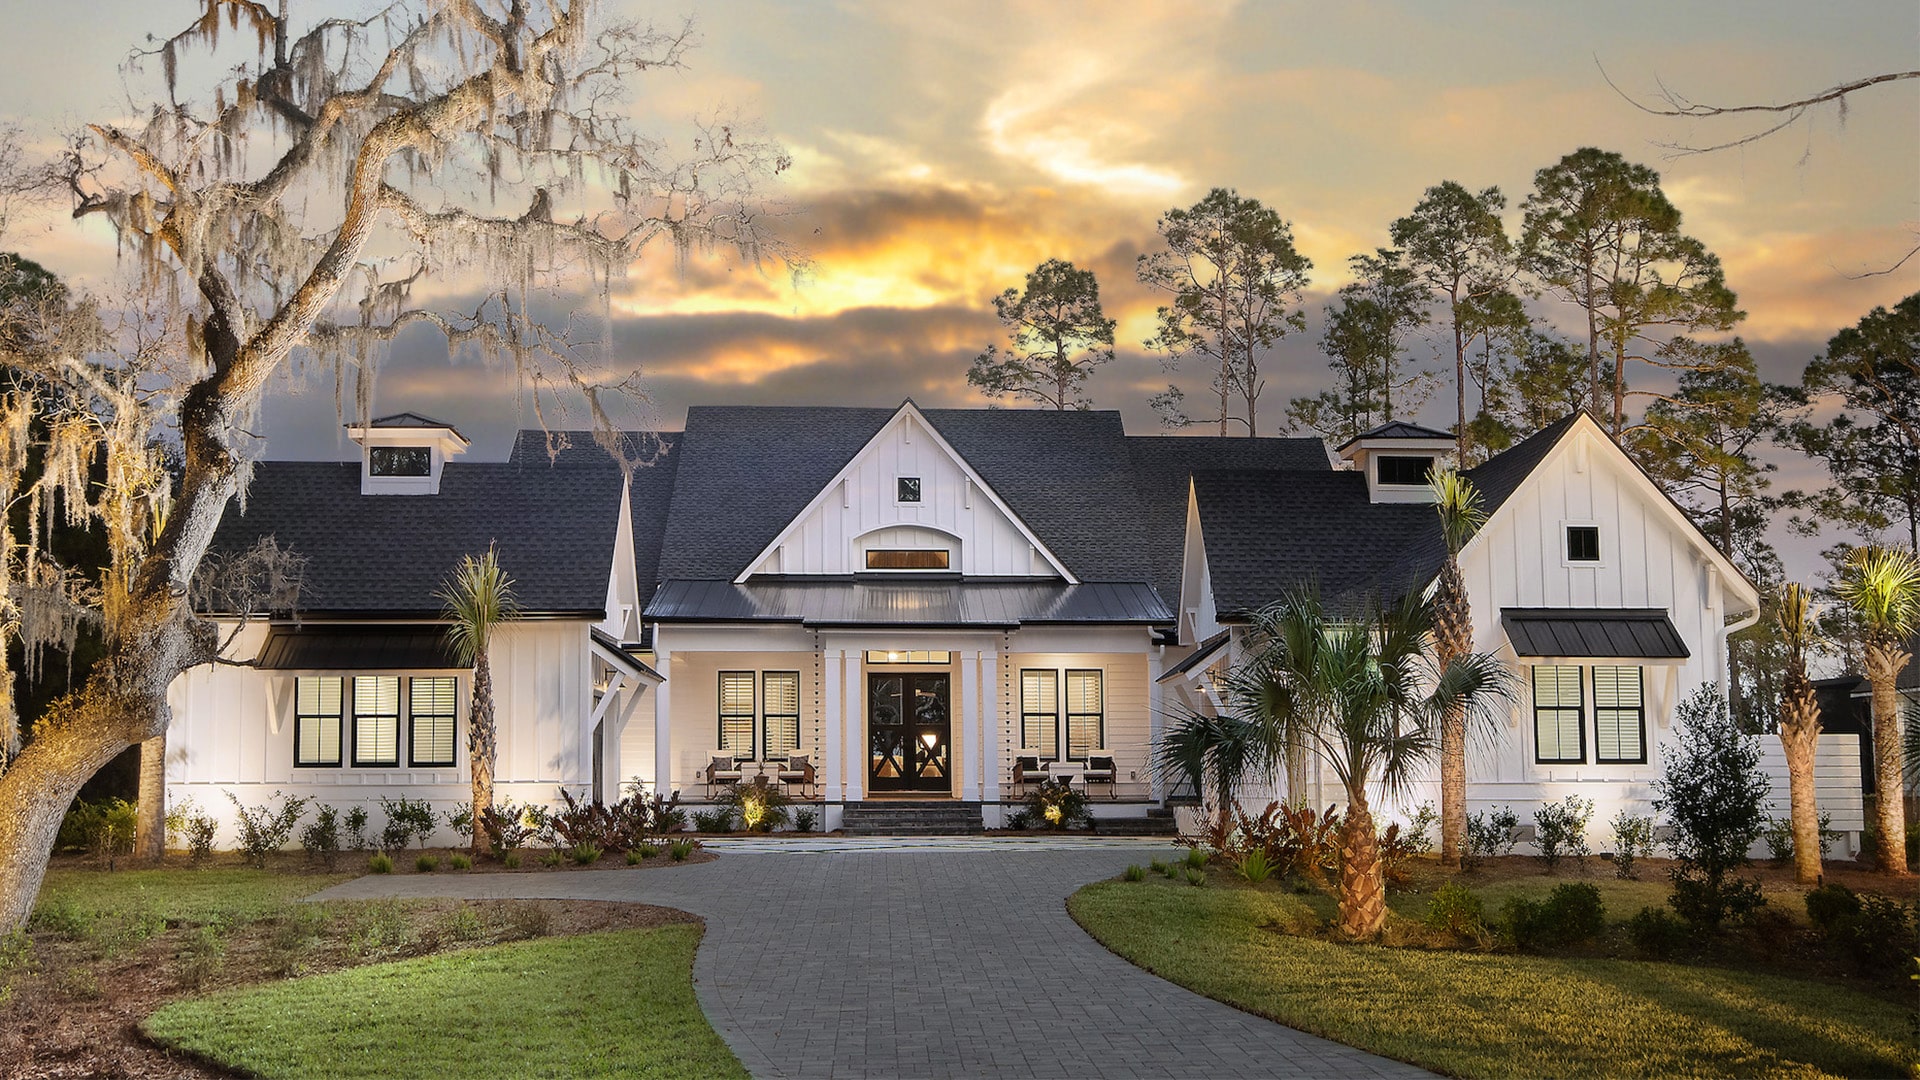 Riverrun Model Custom Home - Work with AR Homes® Custom Home Builders to design your dream home.